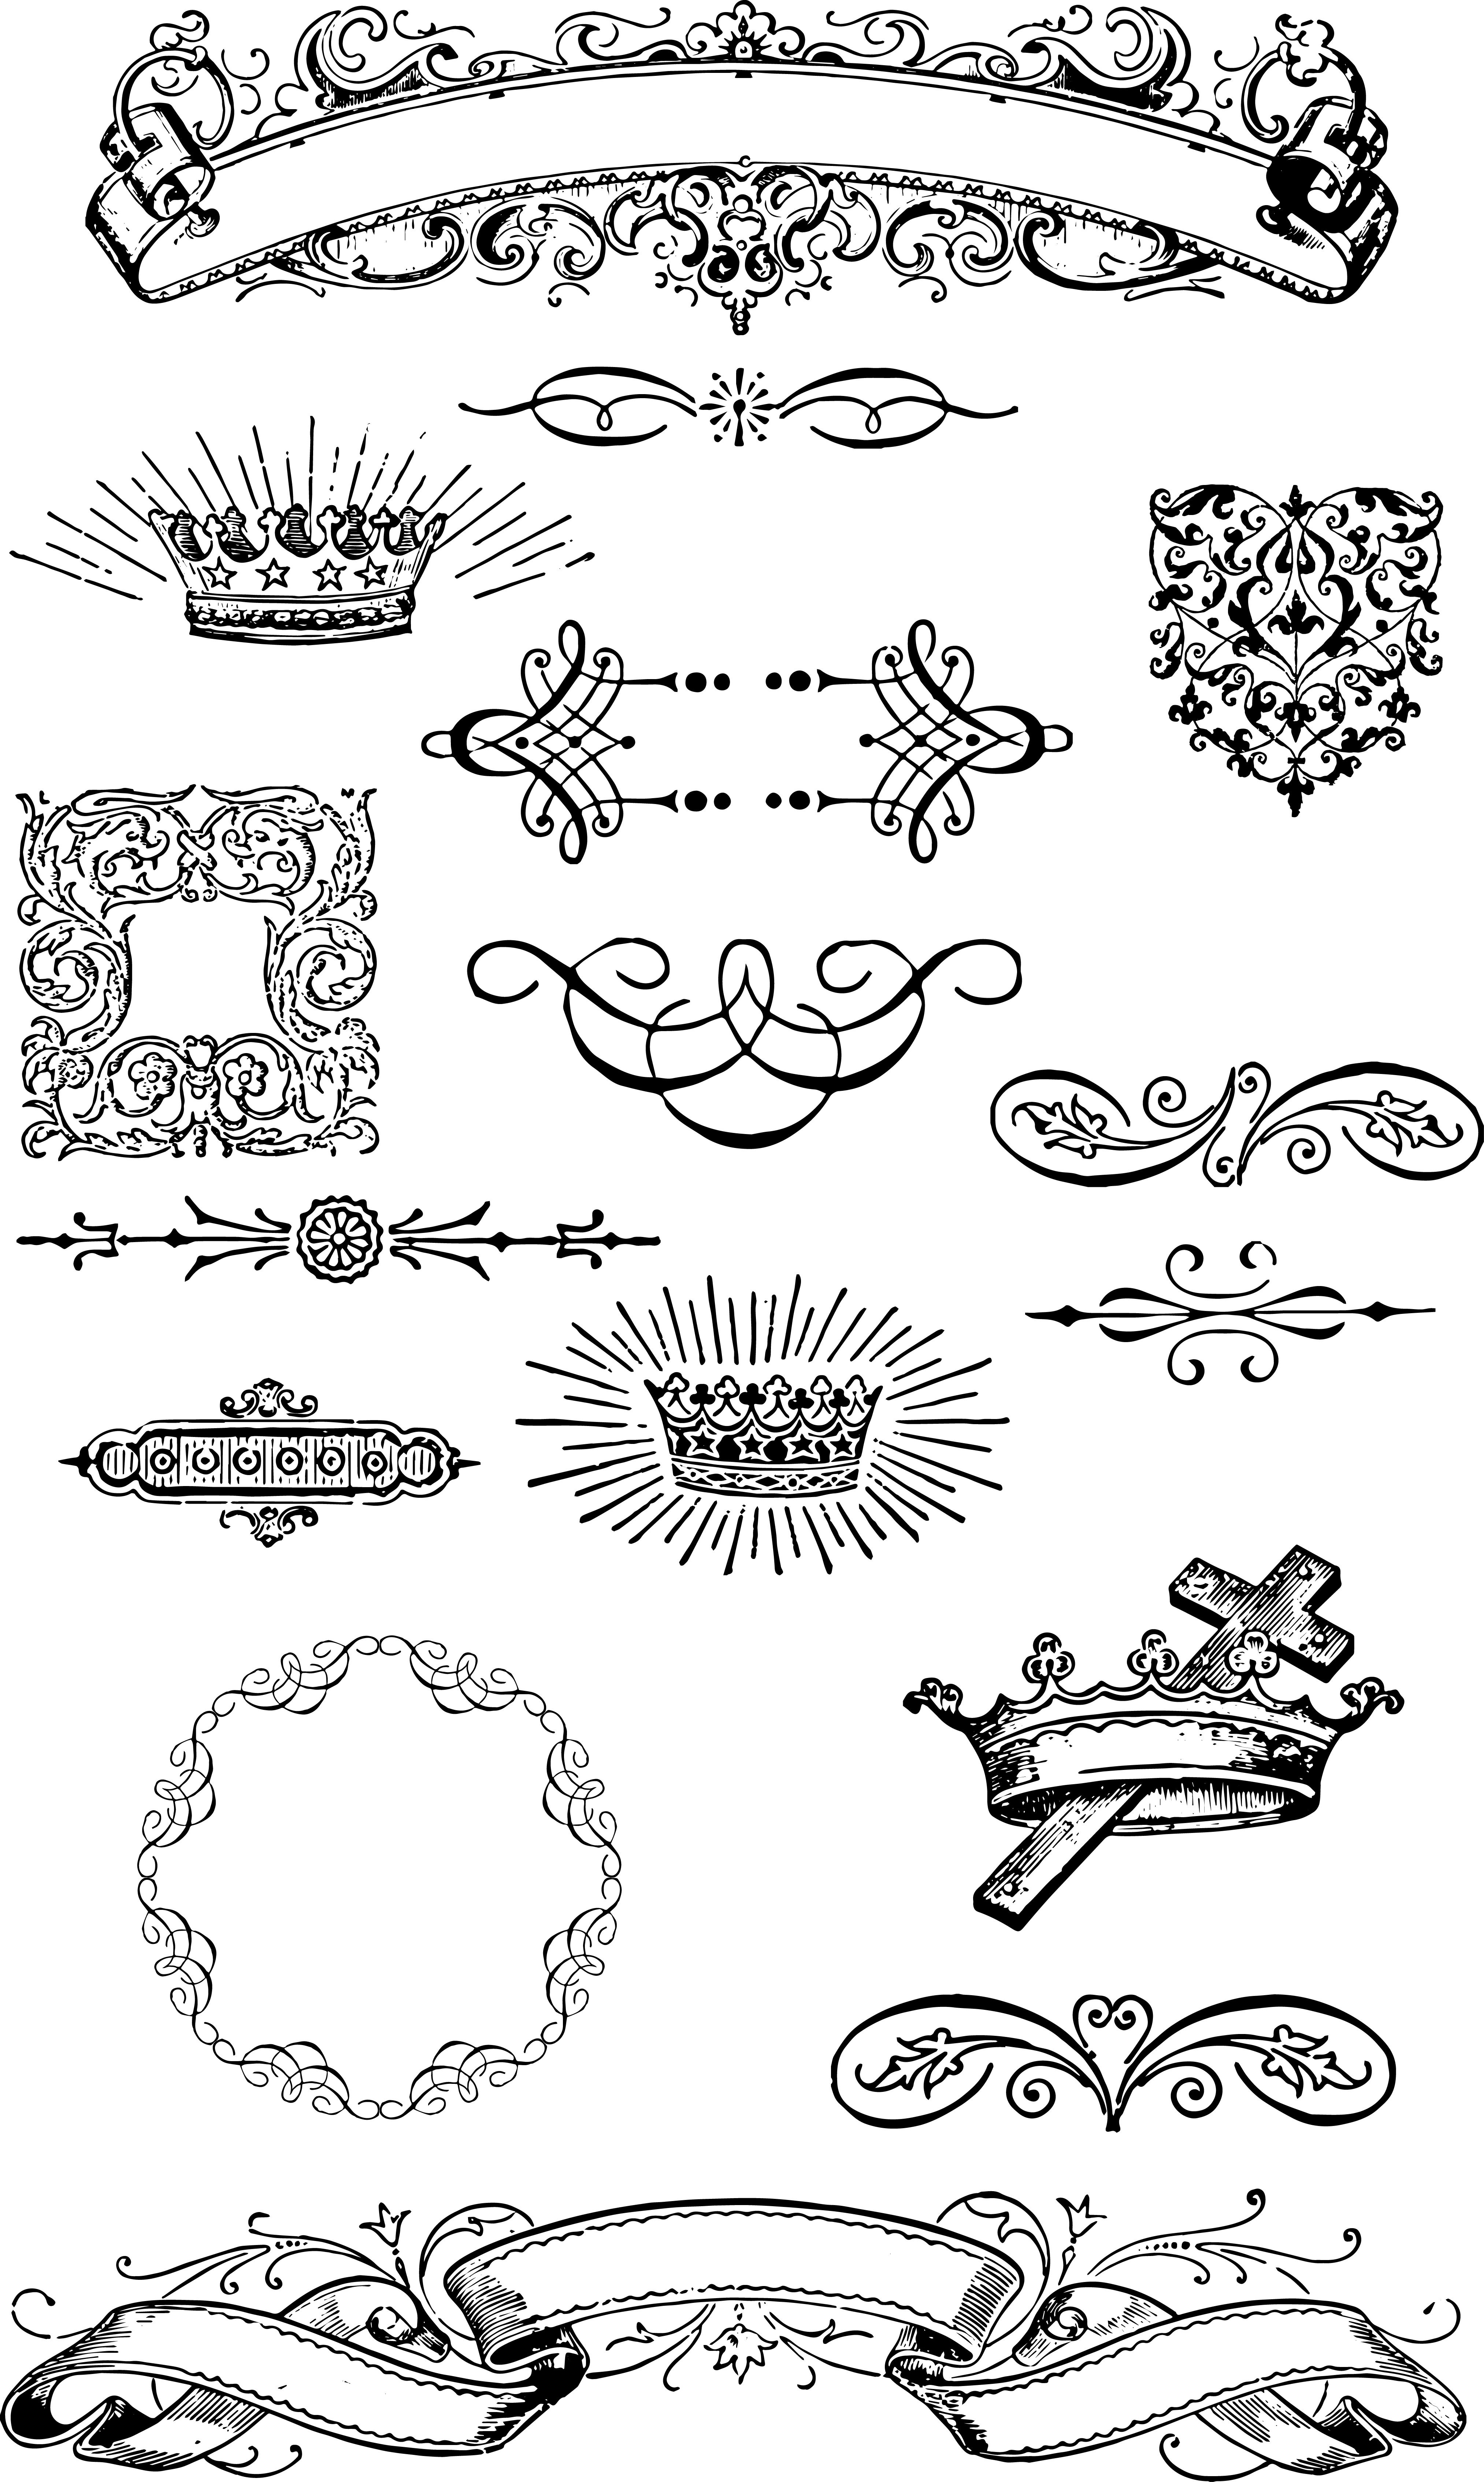 free vintage clipart vector - photo #27